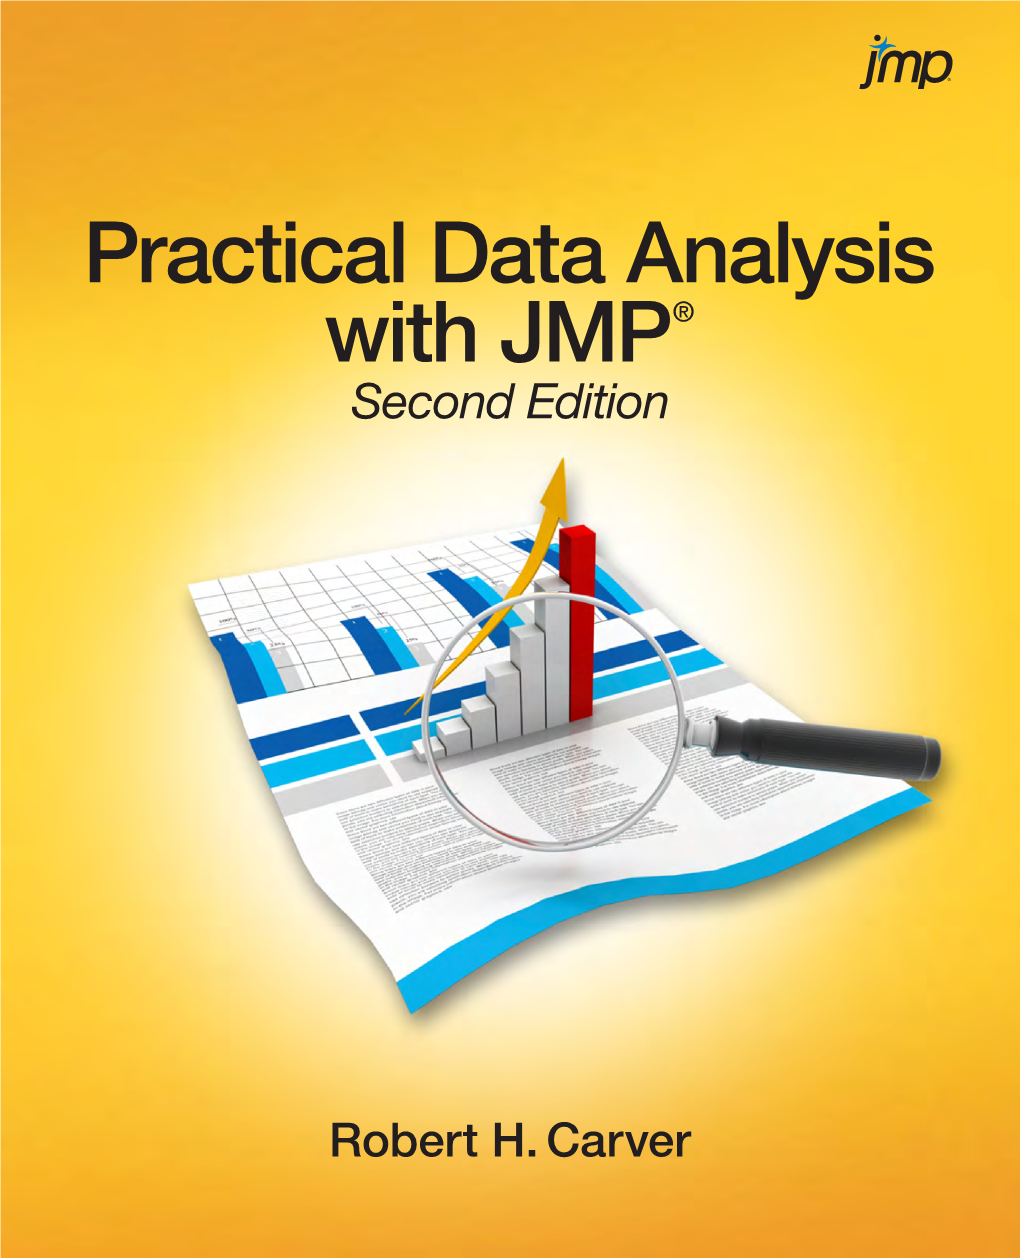 Practical Data Analysis with JMP®, Second Edition